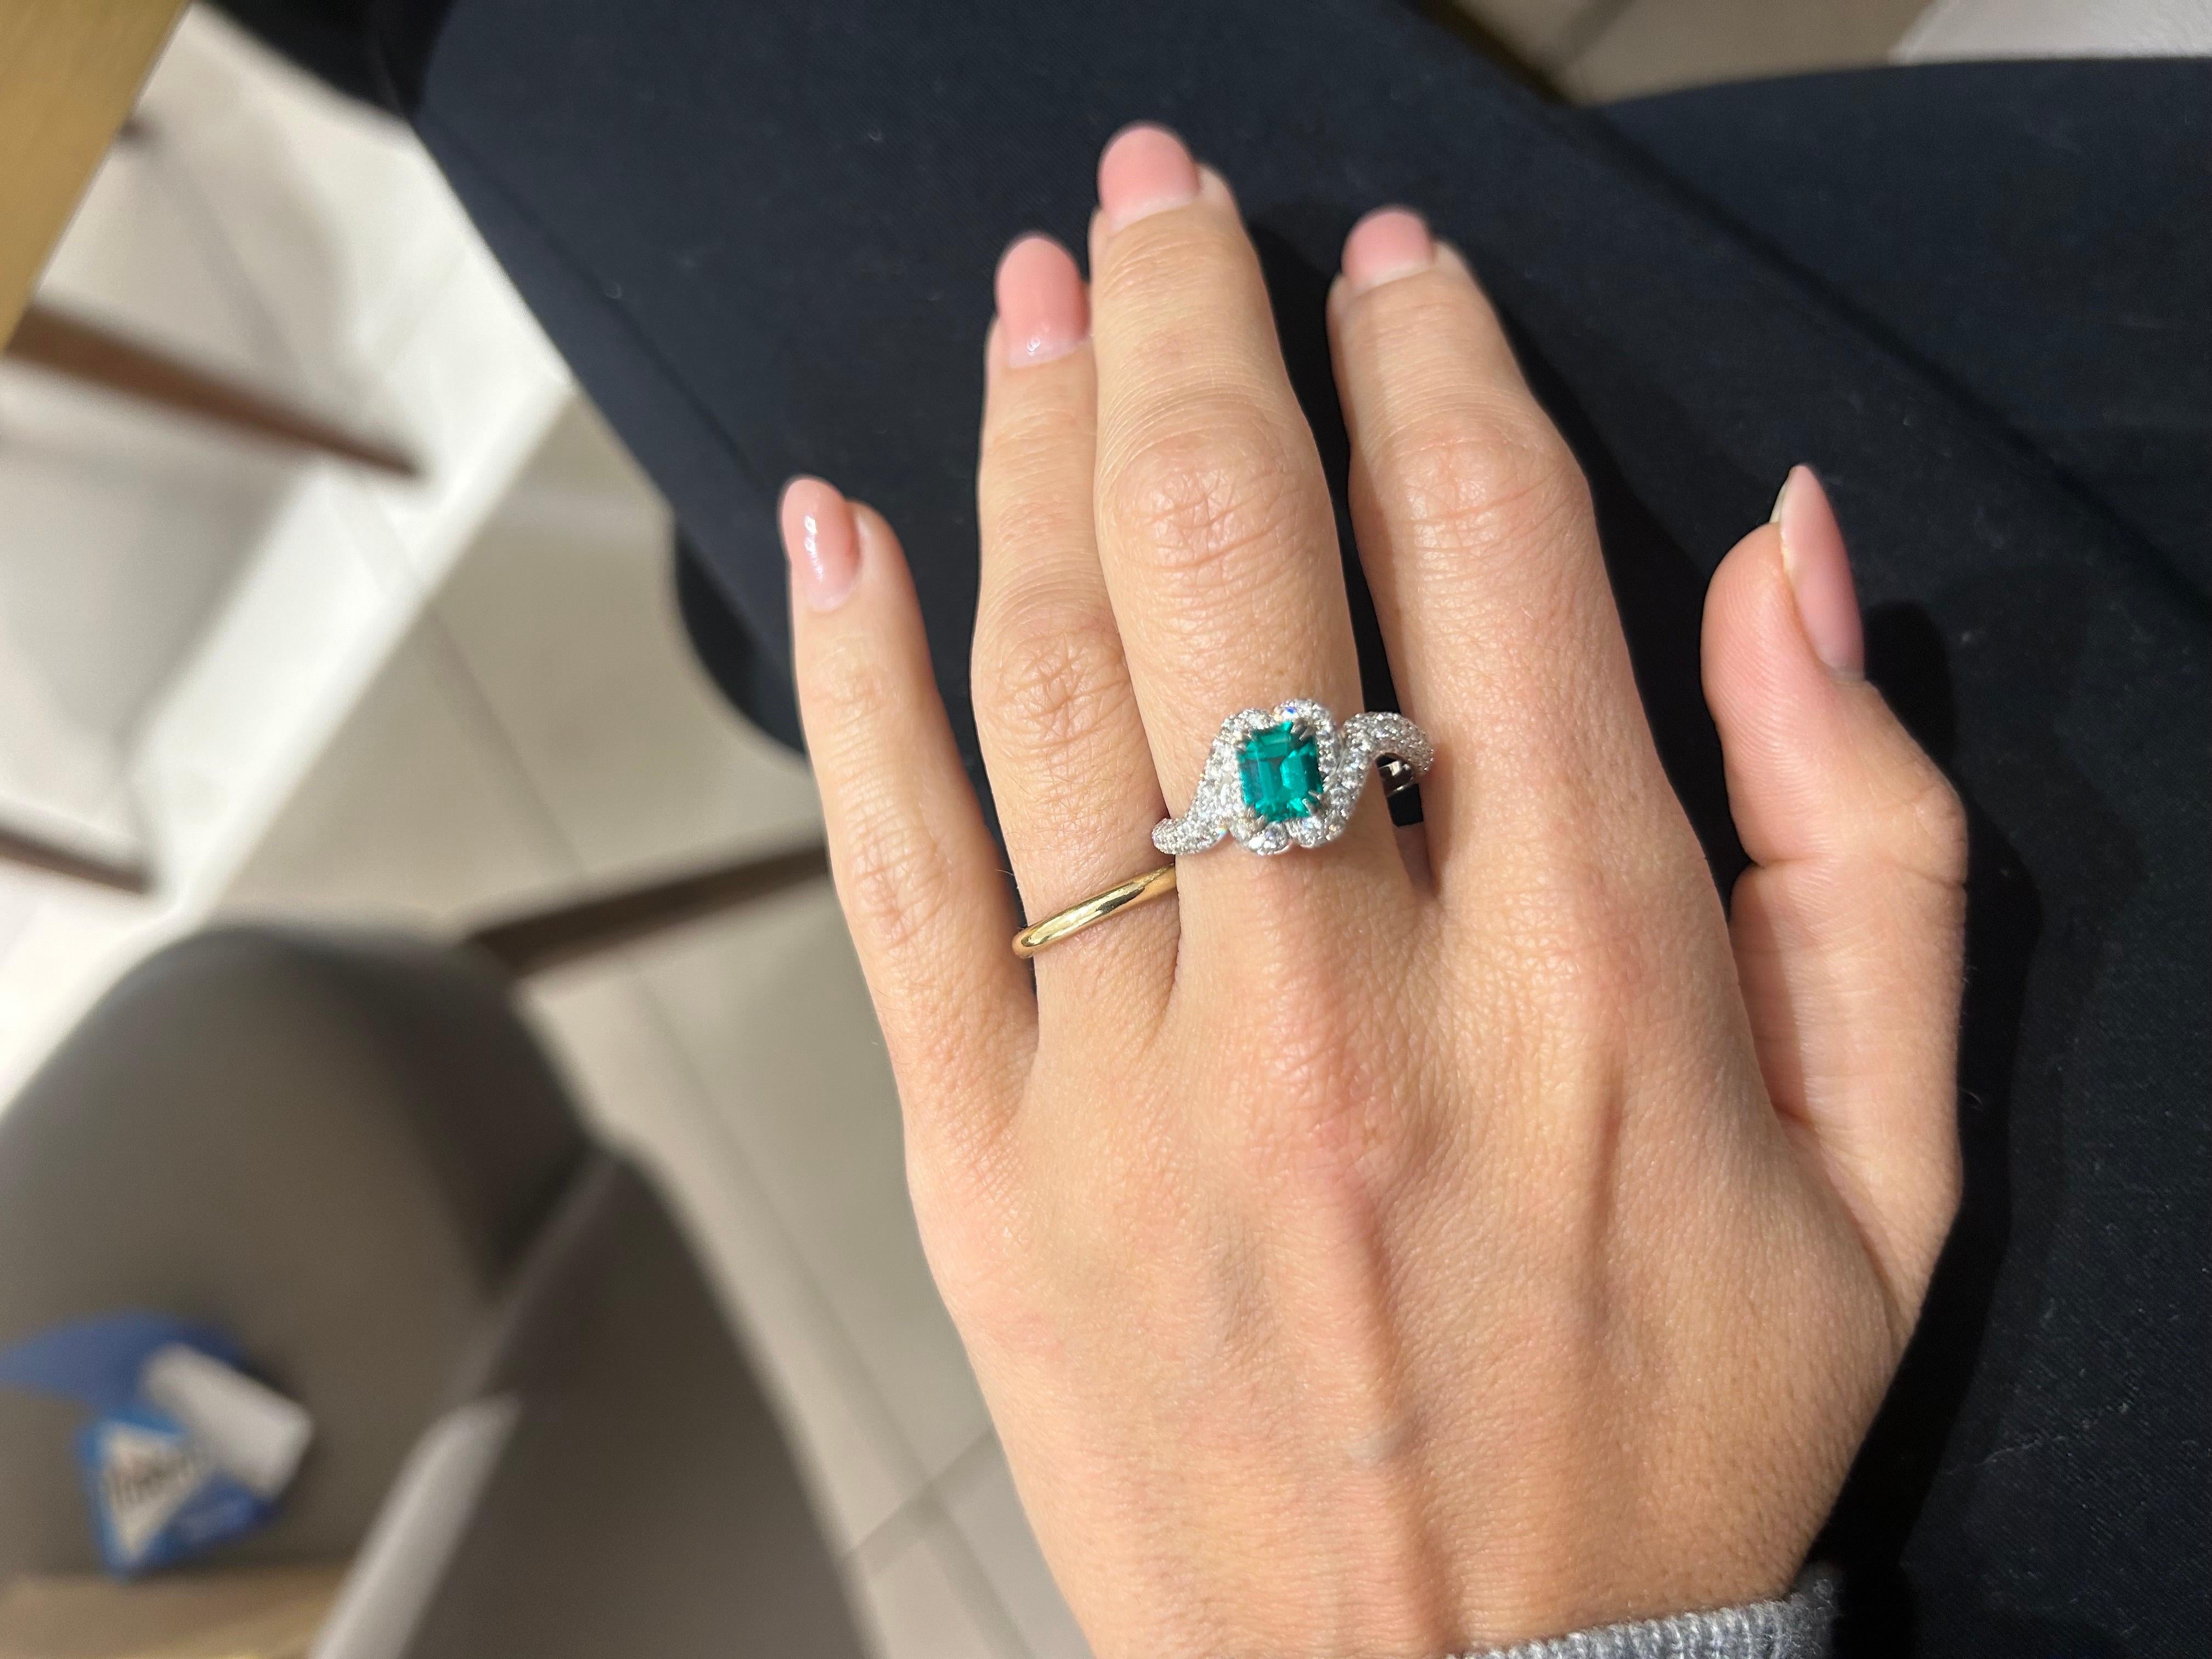 18 Karat White Gold 1.01 Ct Colombian Emerald and 1.01 Ct. Diamond Ring For Sale 4